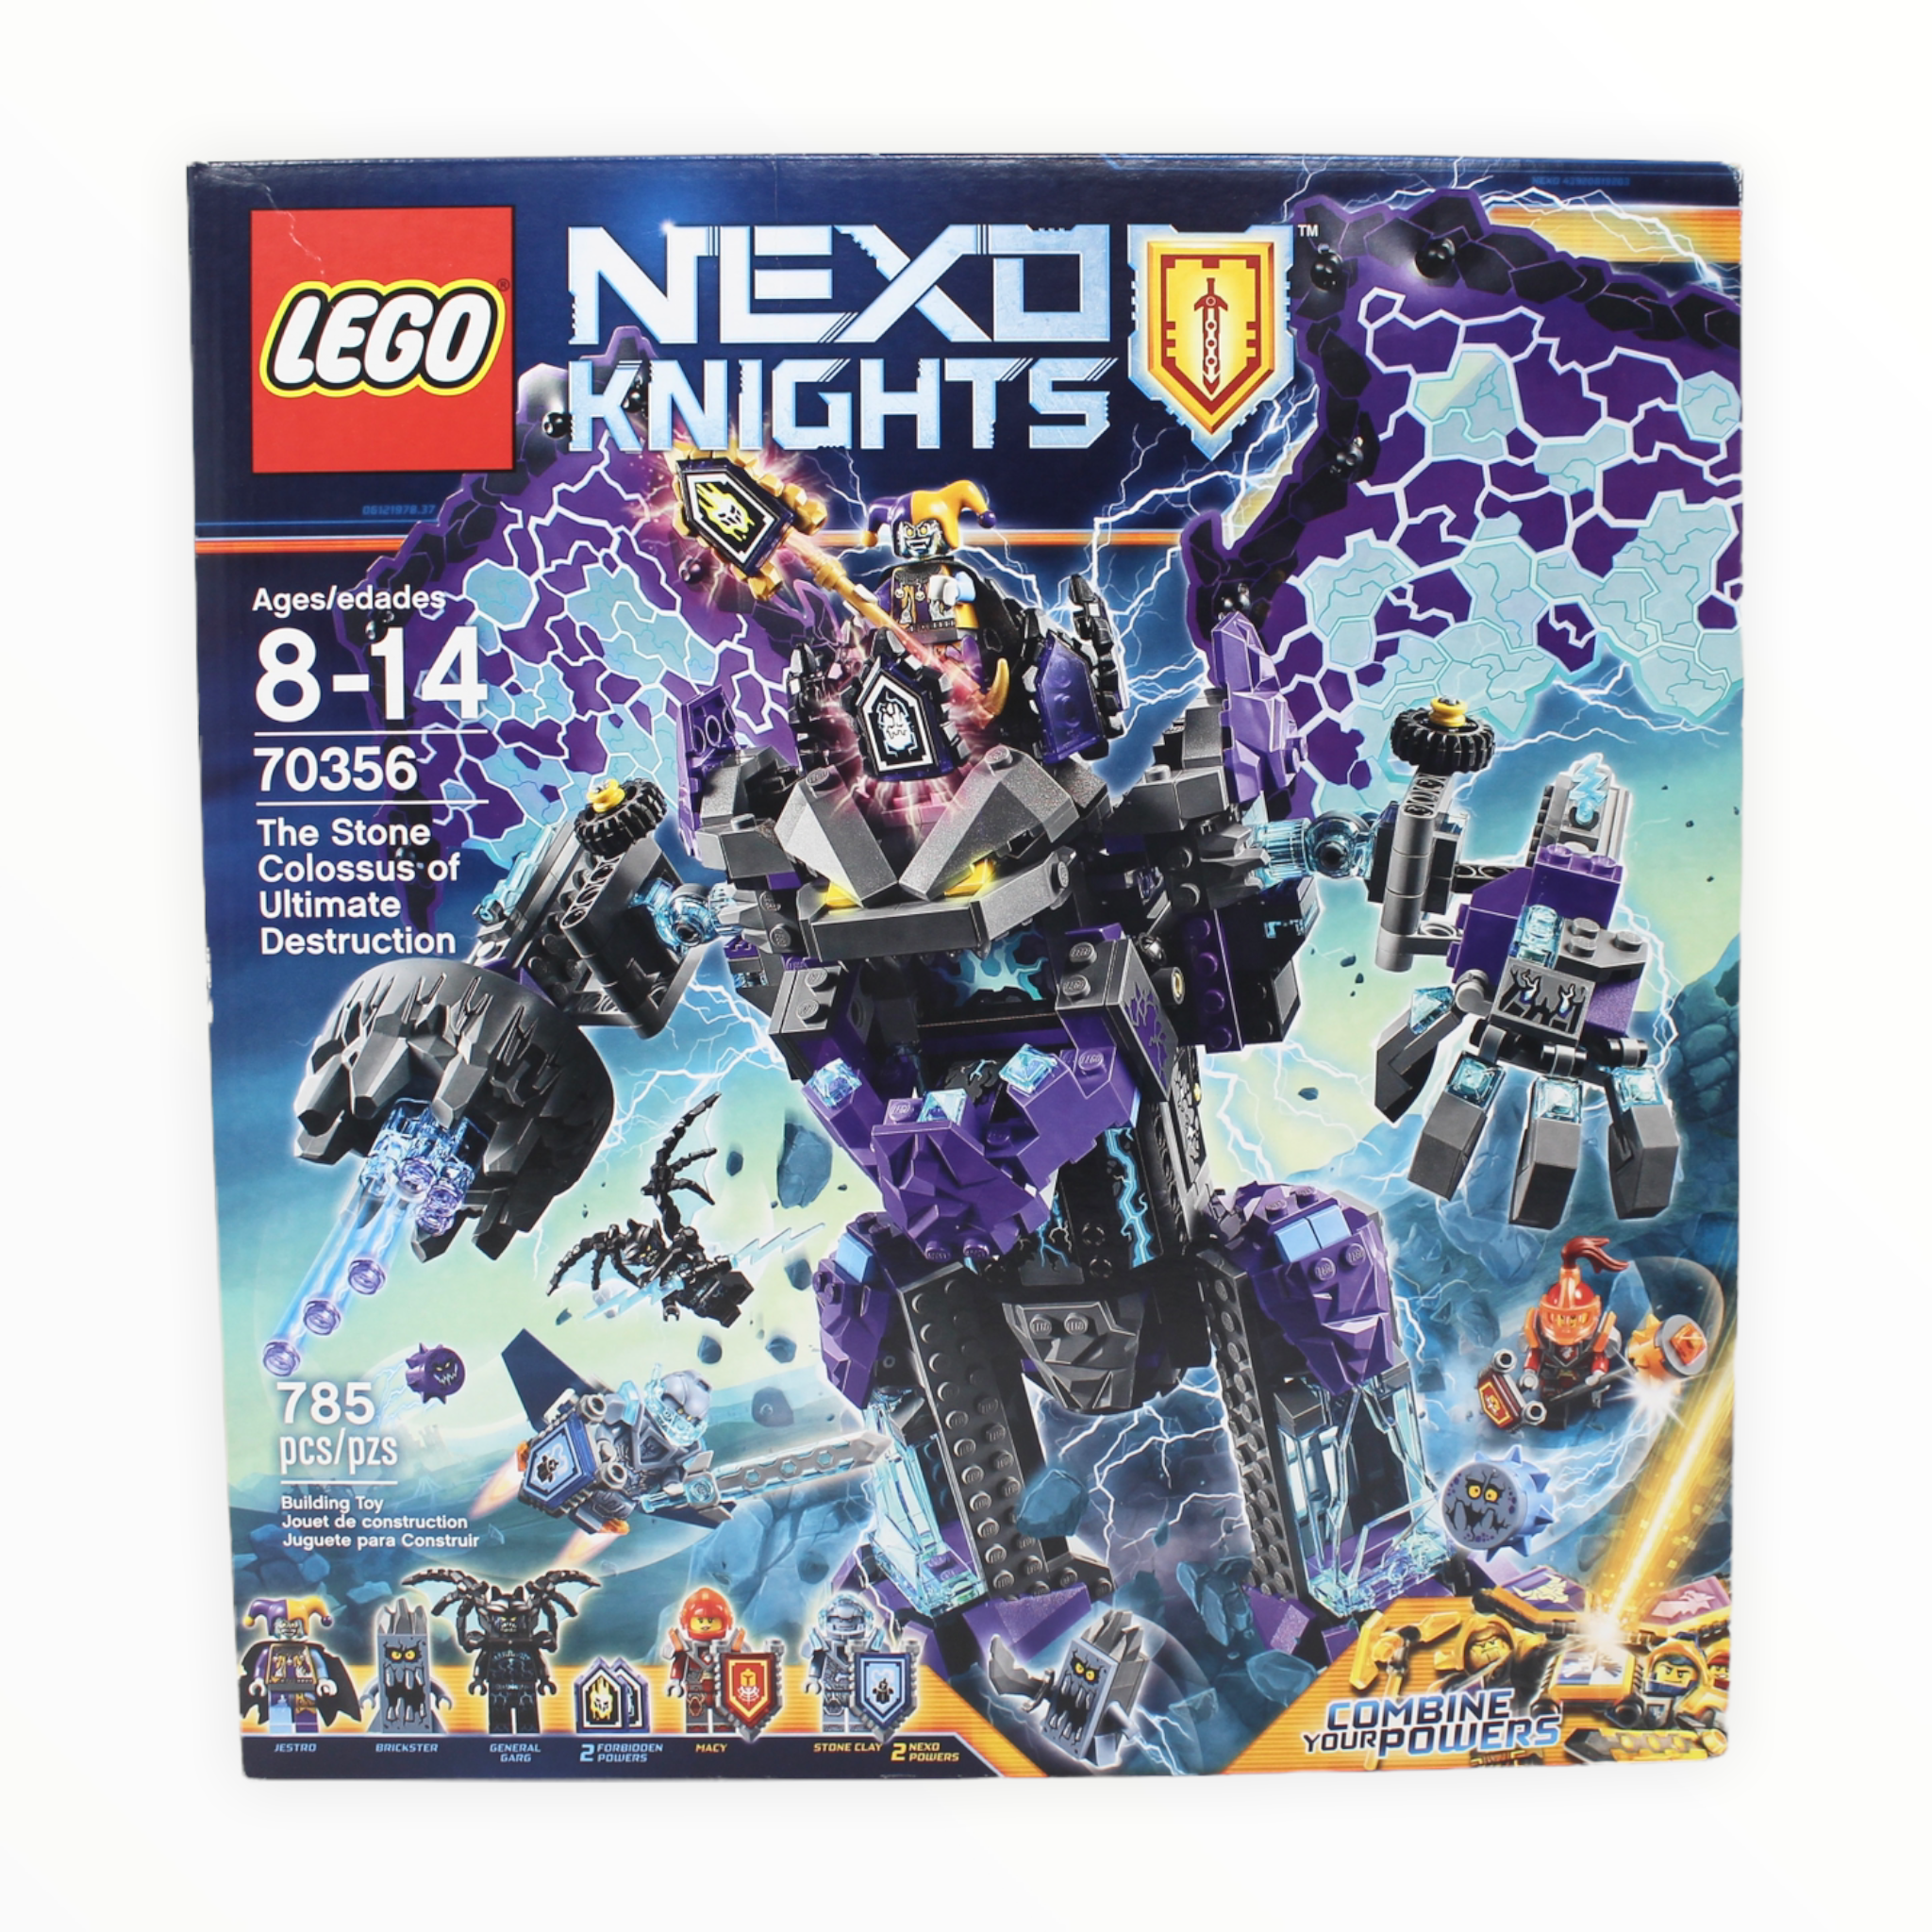 Retired Set 70356 Nexo Knights The Stone Colossus of Ultimate Destruction